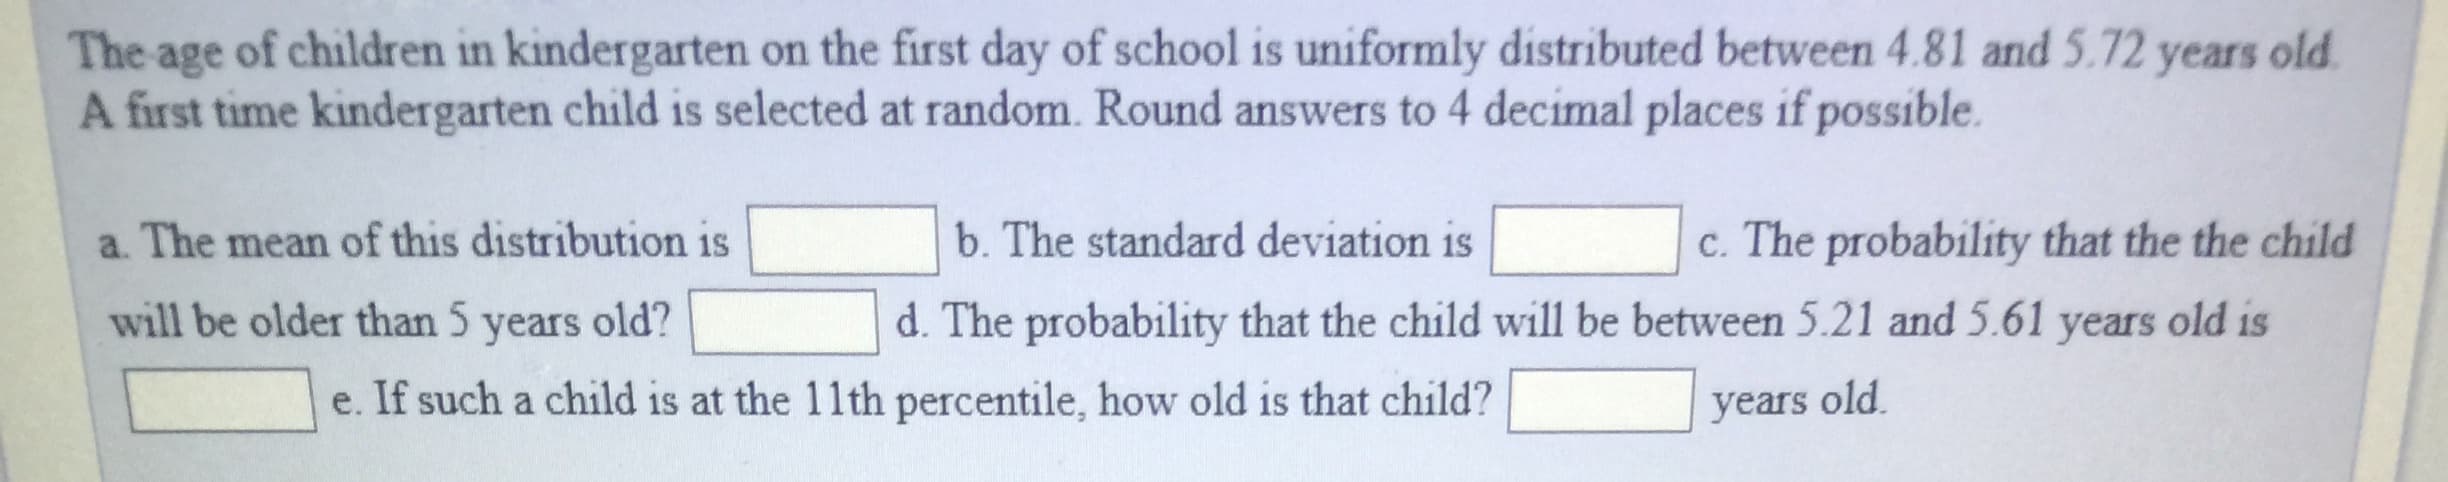 The age of children in kindergarten on the first day of school is uniformly distributed between 4.81 and 5.72 years old
A first time kindergarten child is selected at random. Round answers to 4 decimal places if possible.
a. The mean of this distribution is
will be older than 5 years old?
b. The standard deviation is
c. The probability that the the child
d. The probability that the child will be between 5.21 and 5.61 years old is
e. If such a child is at the 11th percentile, how old is that child?
years old
